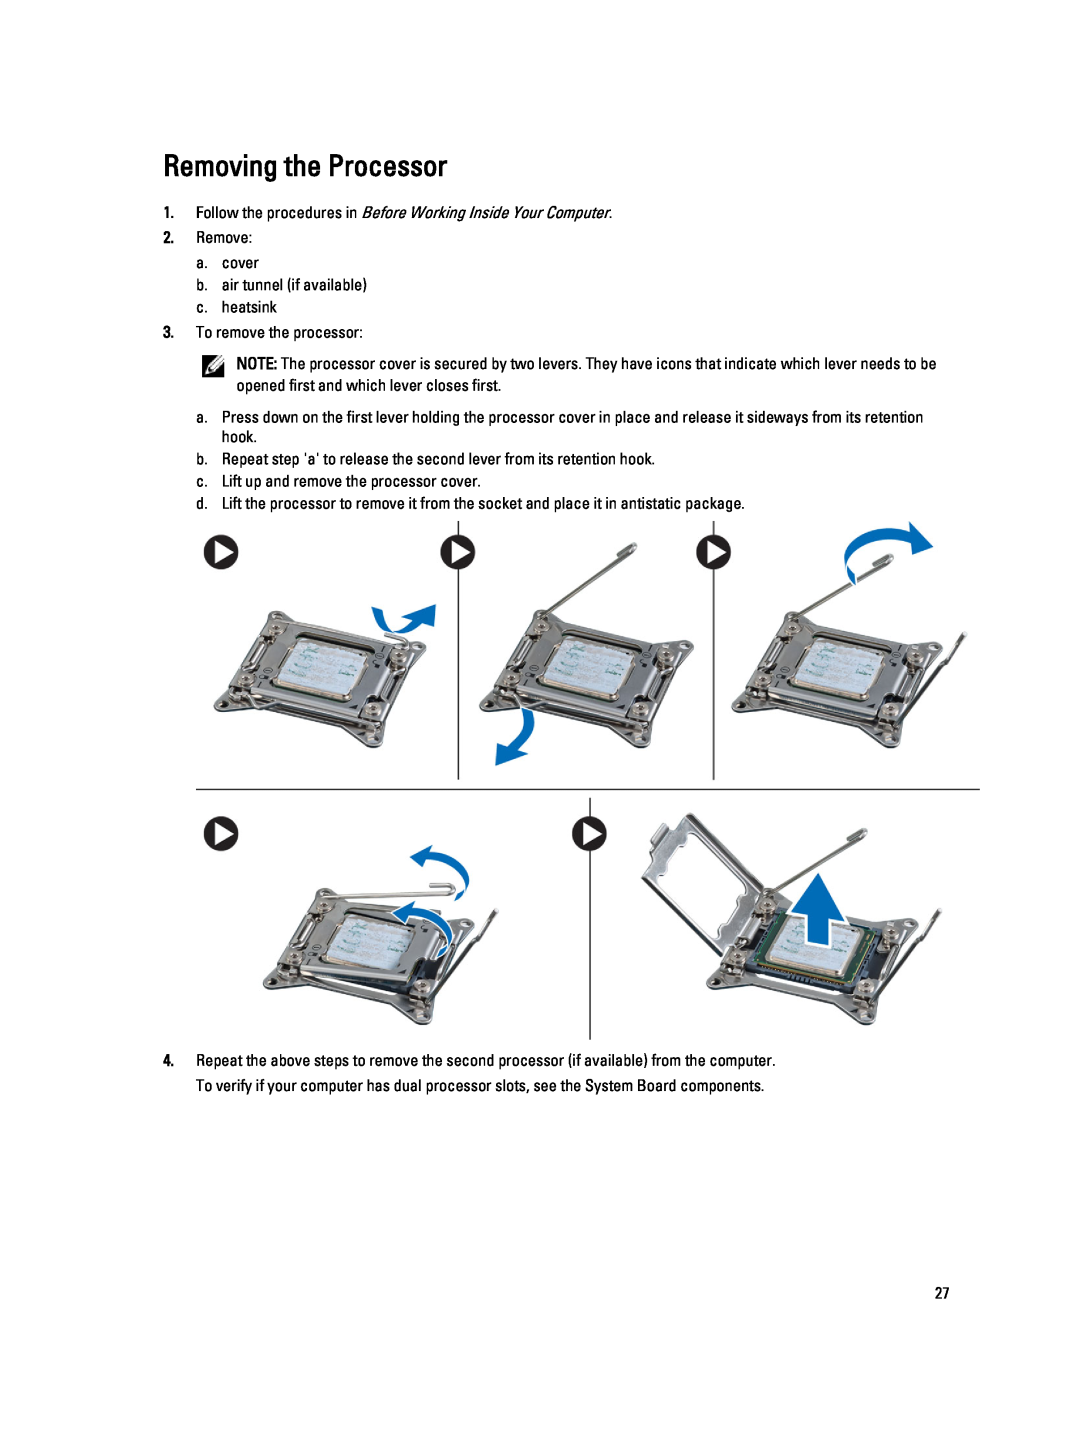 Dell T5610 owner manual Removing the Processor, Follow the procedures in Before Working Inside Your Computer 